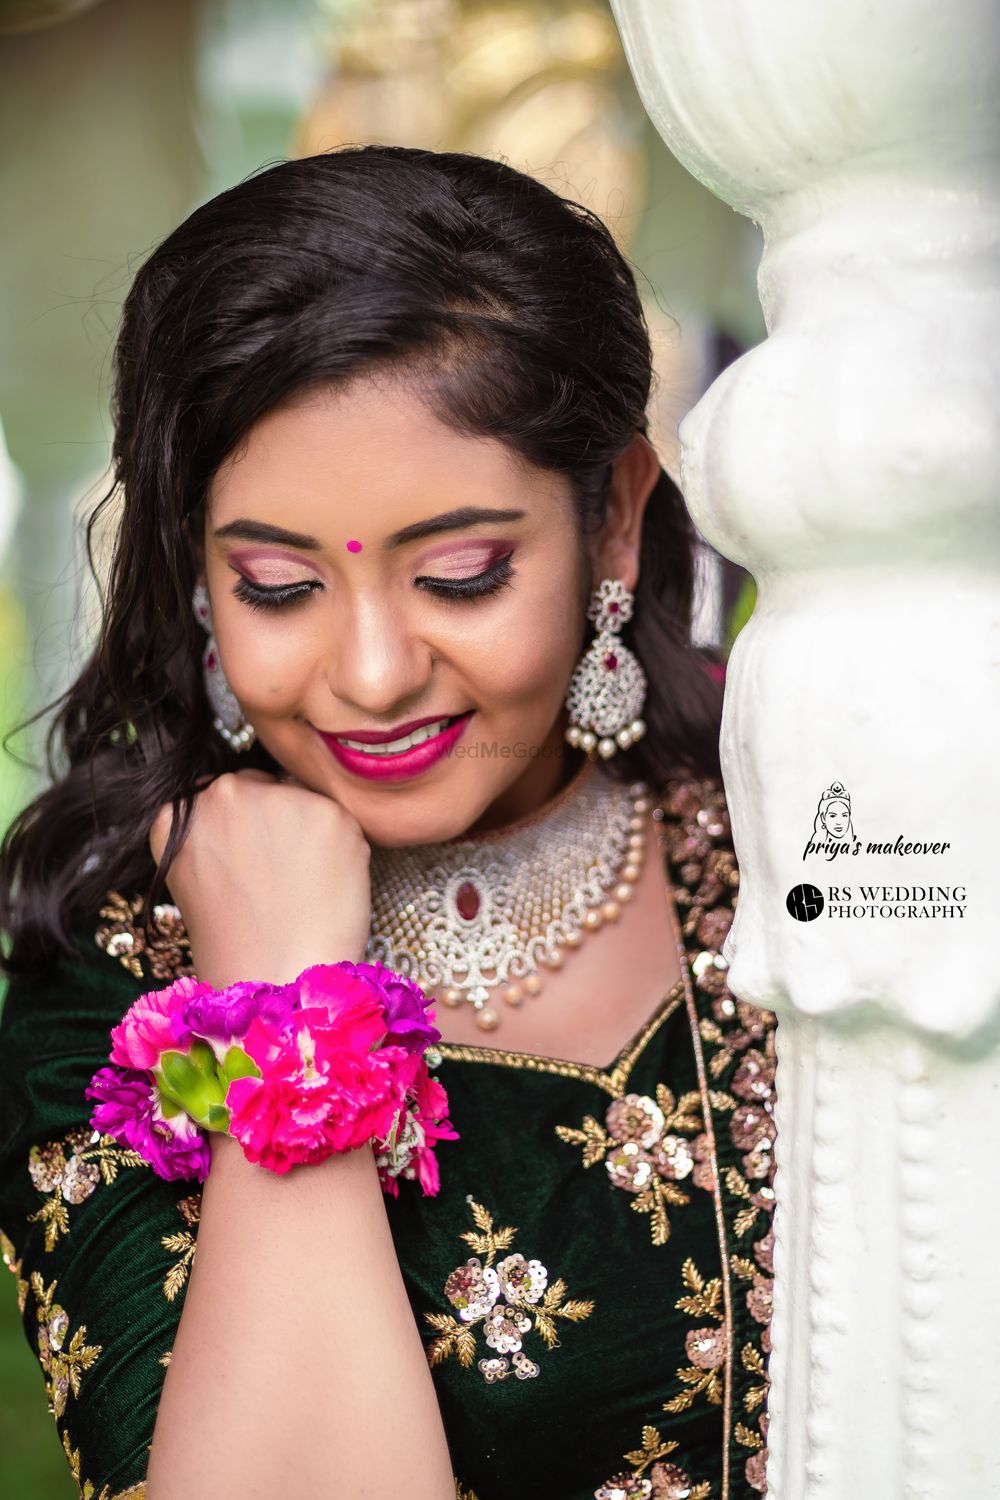 Photo From Celebrity Makeup - By Priya's Bridal Makeover